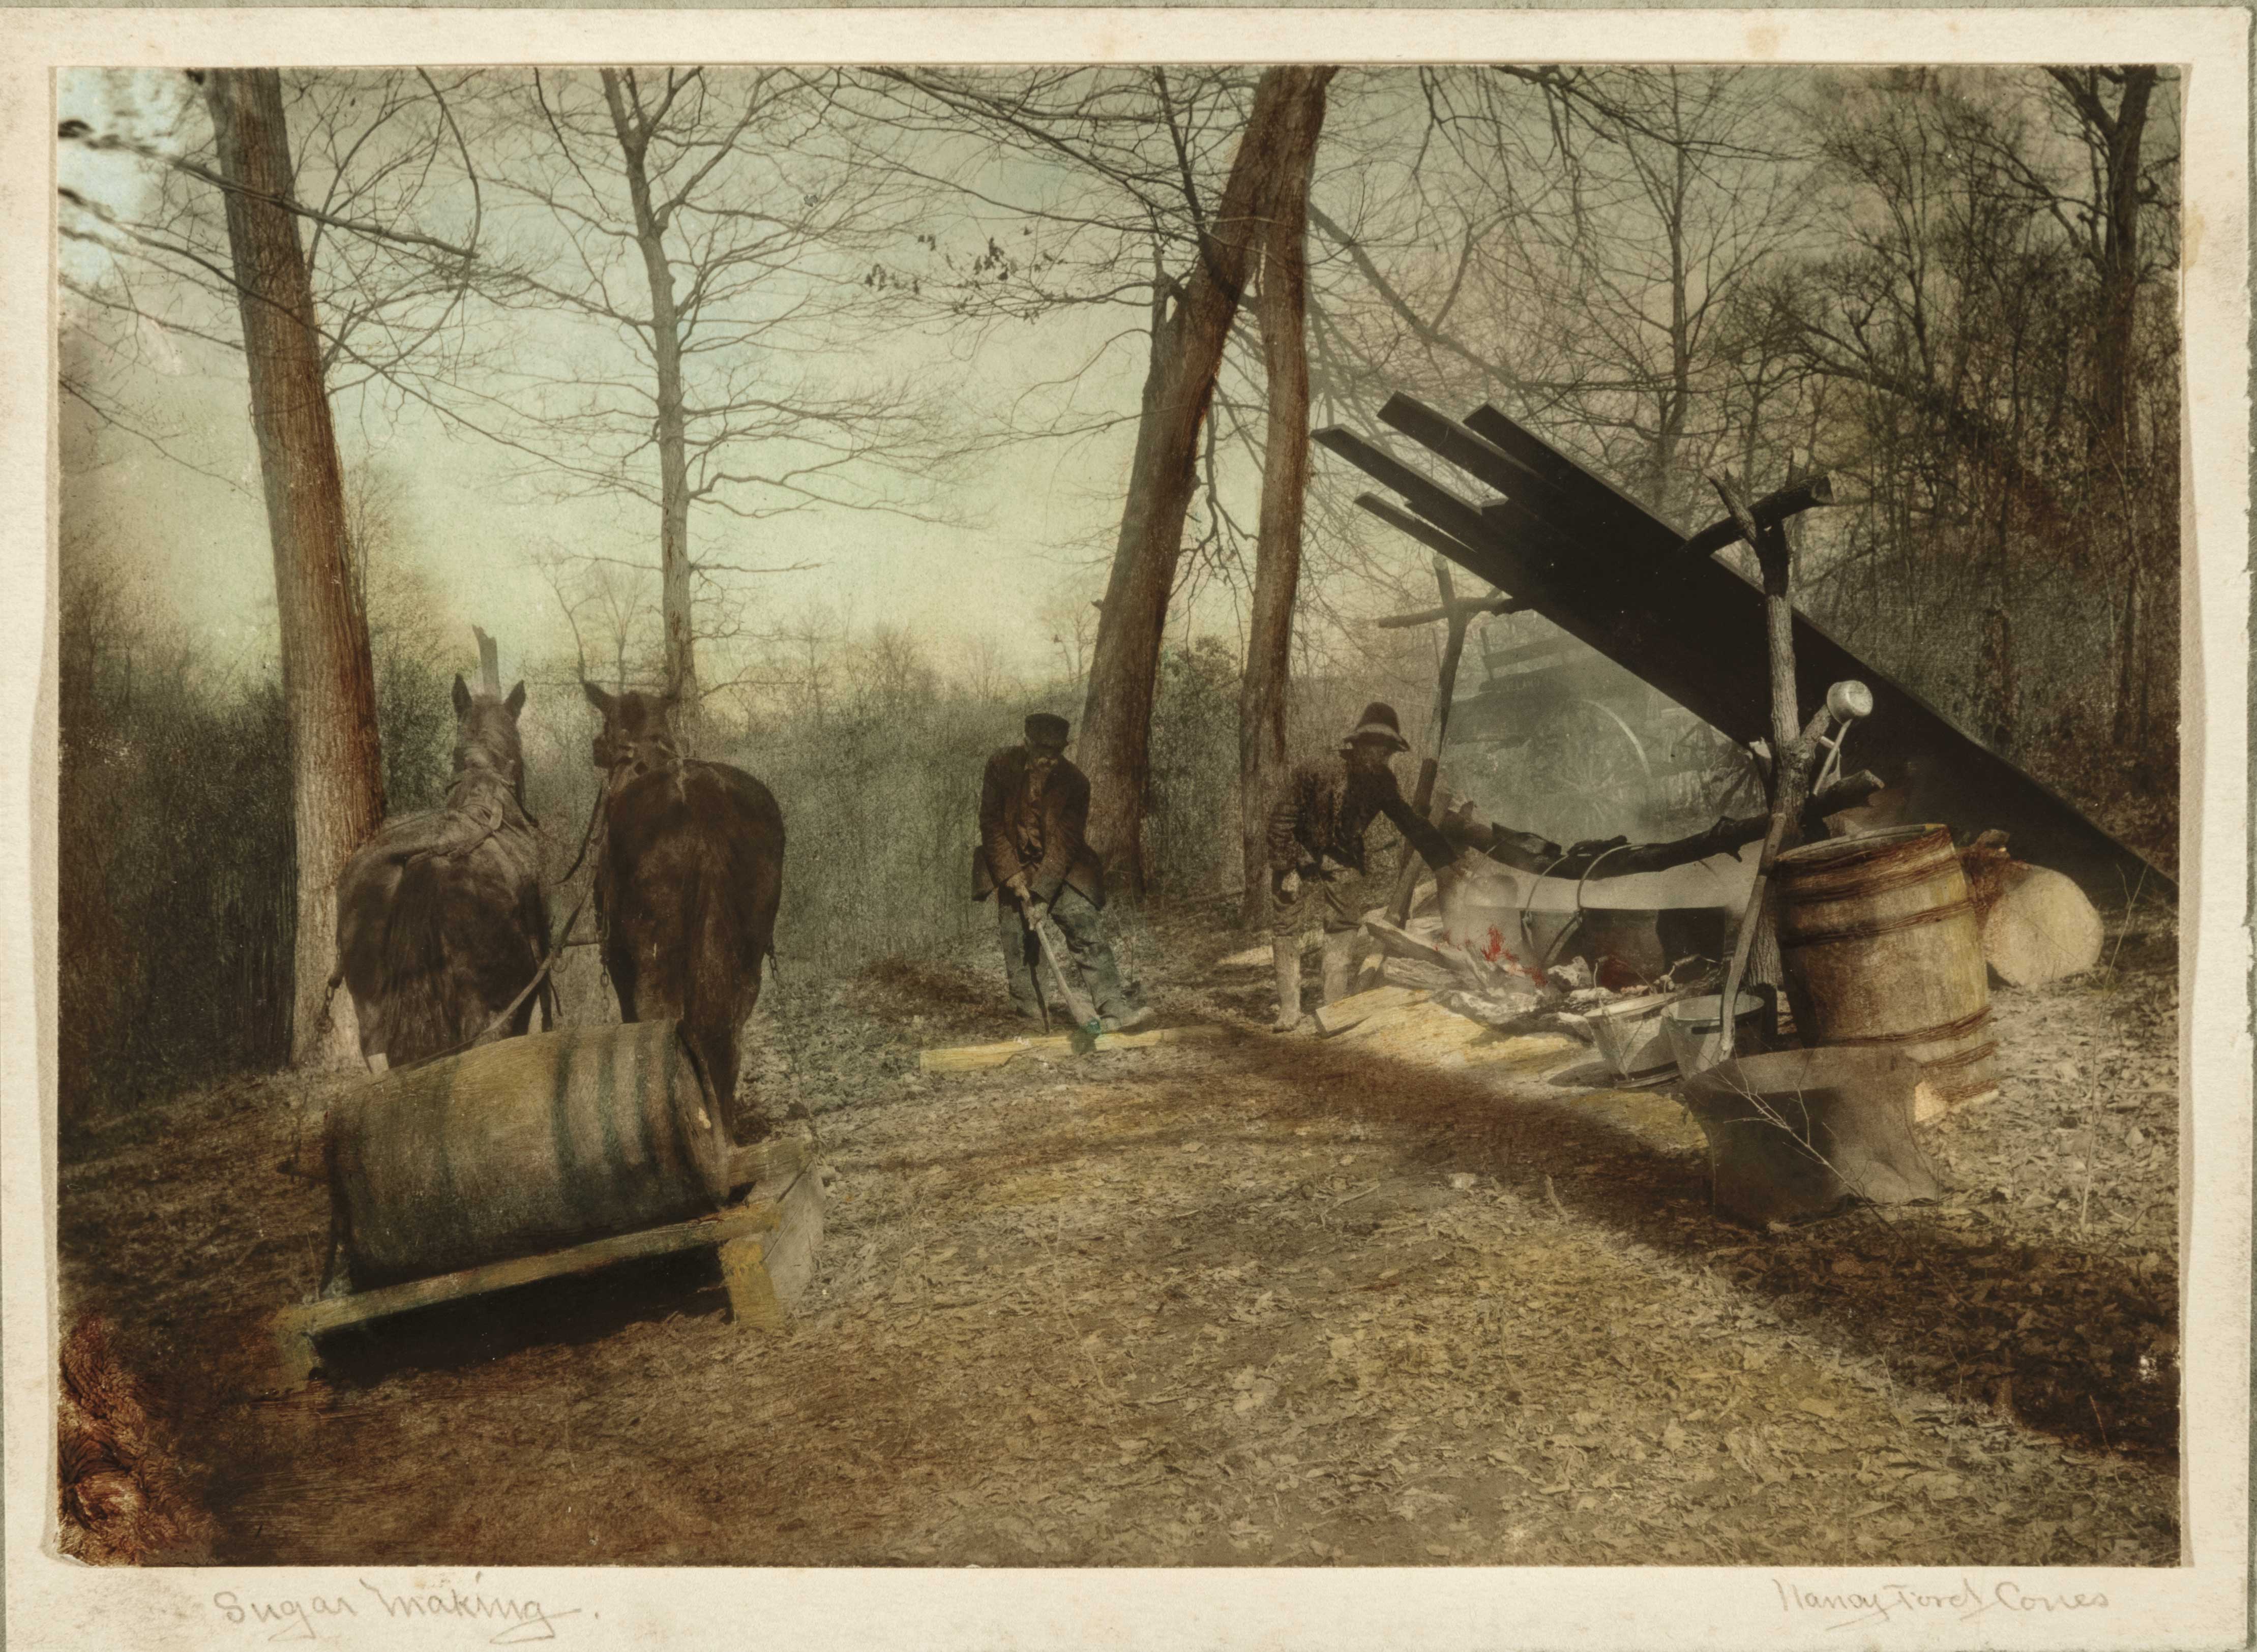 Nancy Ford Cones, (American, 1869–1962), Sugarmaking, 1920, hand-colored print. Collection of Randle and Cristina Egbert